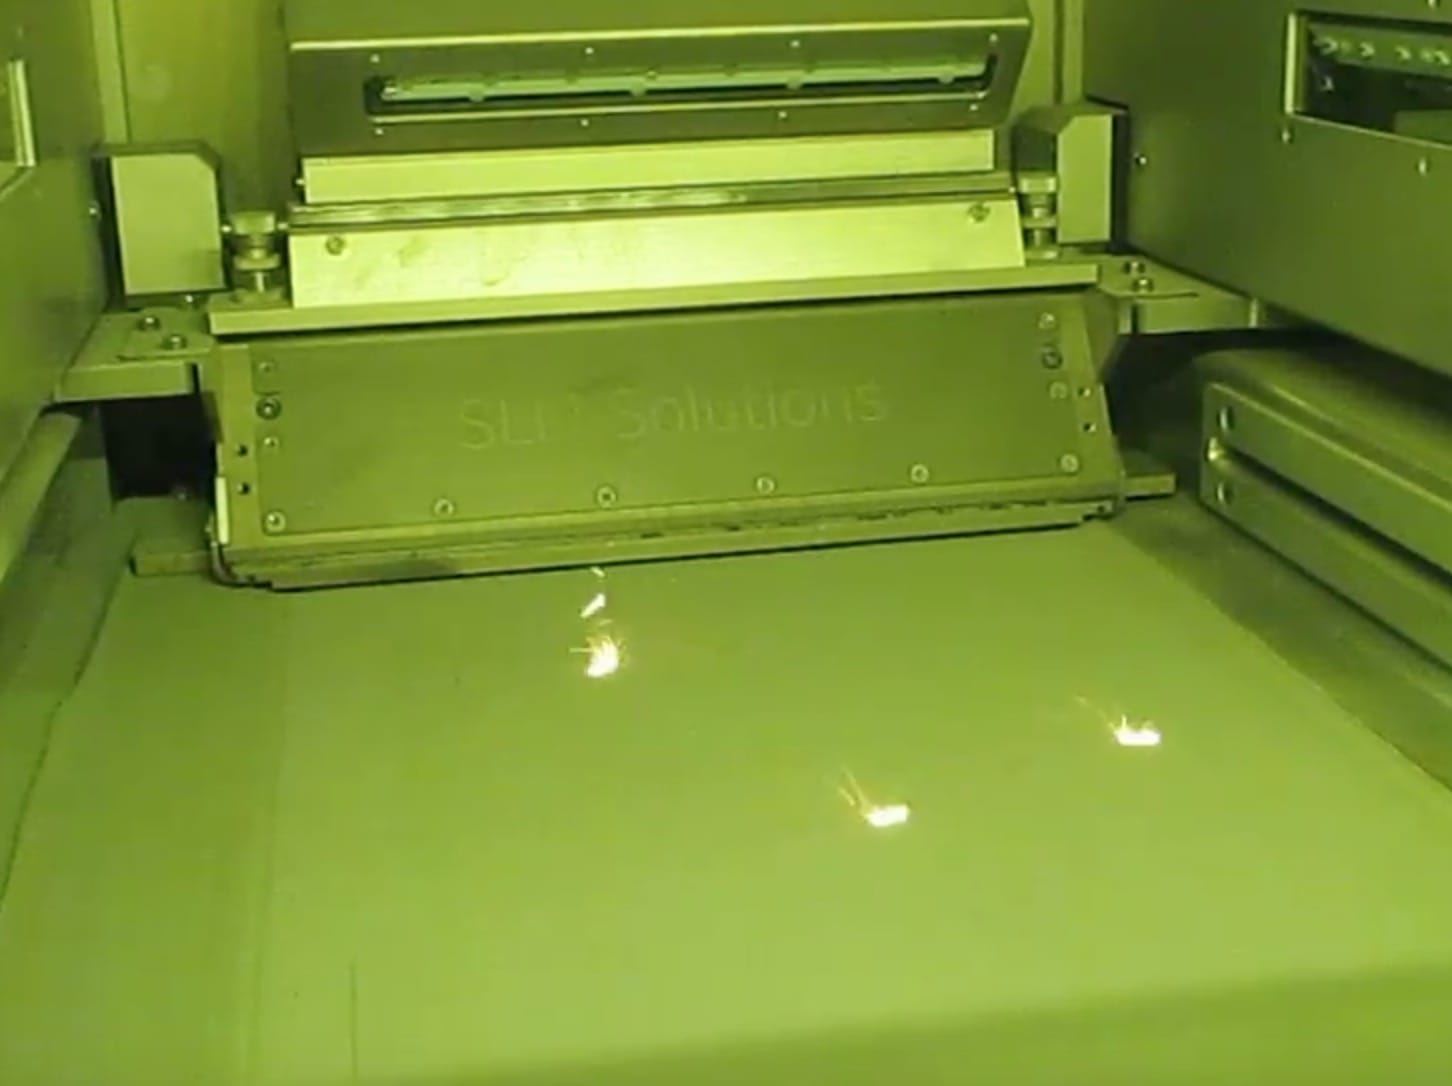  A laser system 3D printing in metal powder with hopefully little oxygen present 